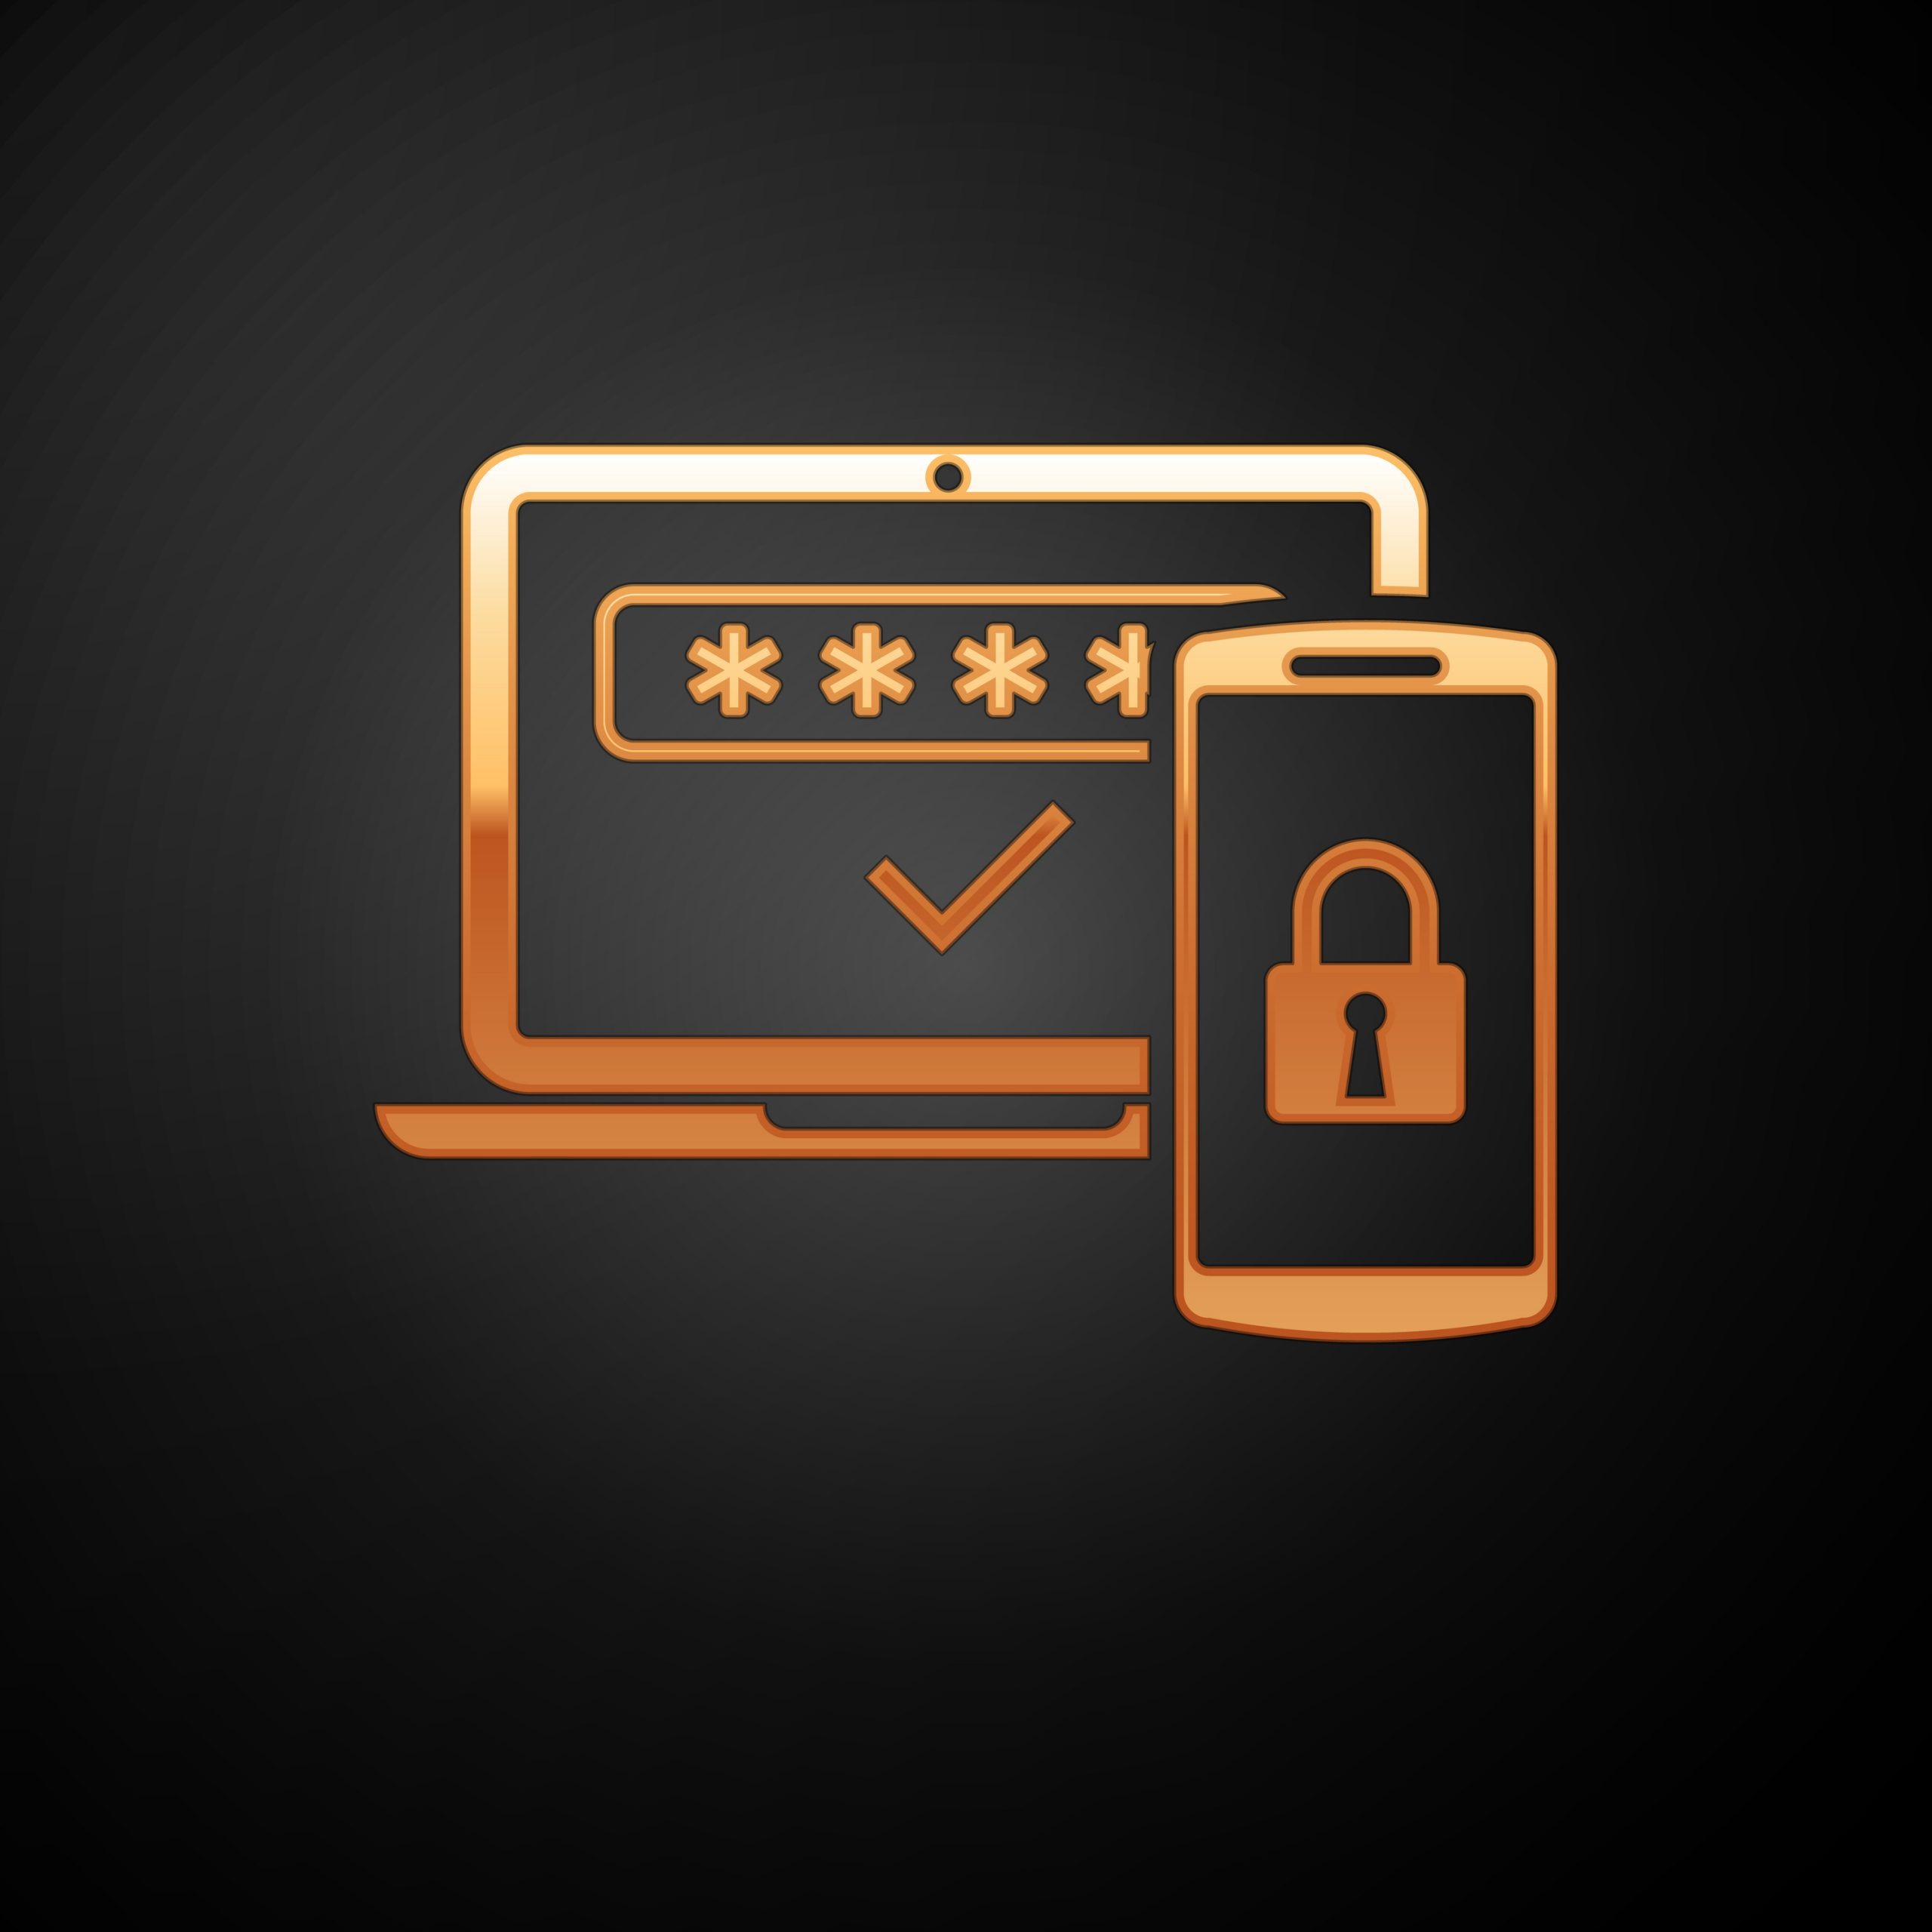 Gold clip-art style design of phone and computer | Featured Image for Two Factor Authentication: What’s the Best Method? | Blog